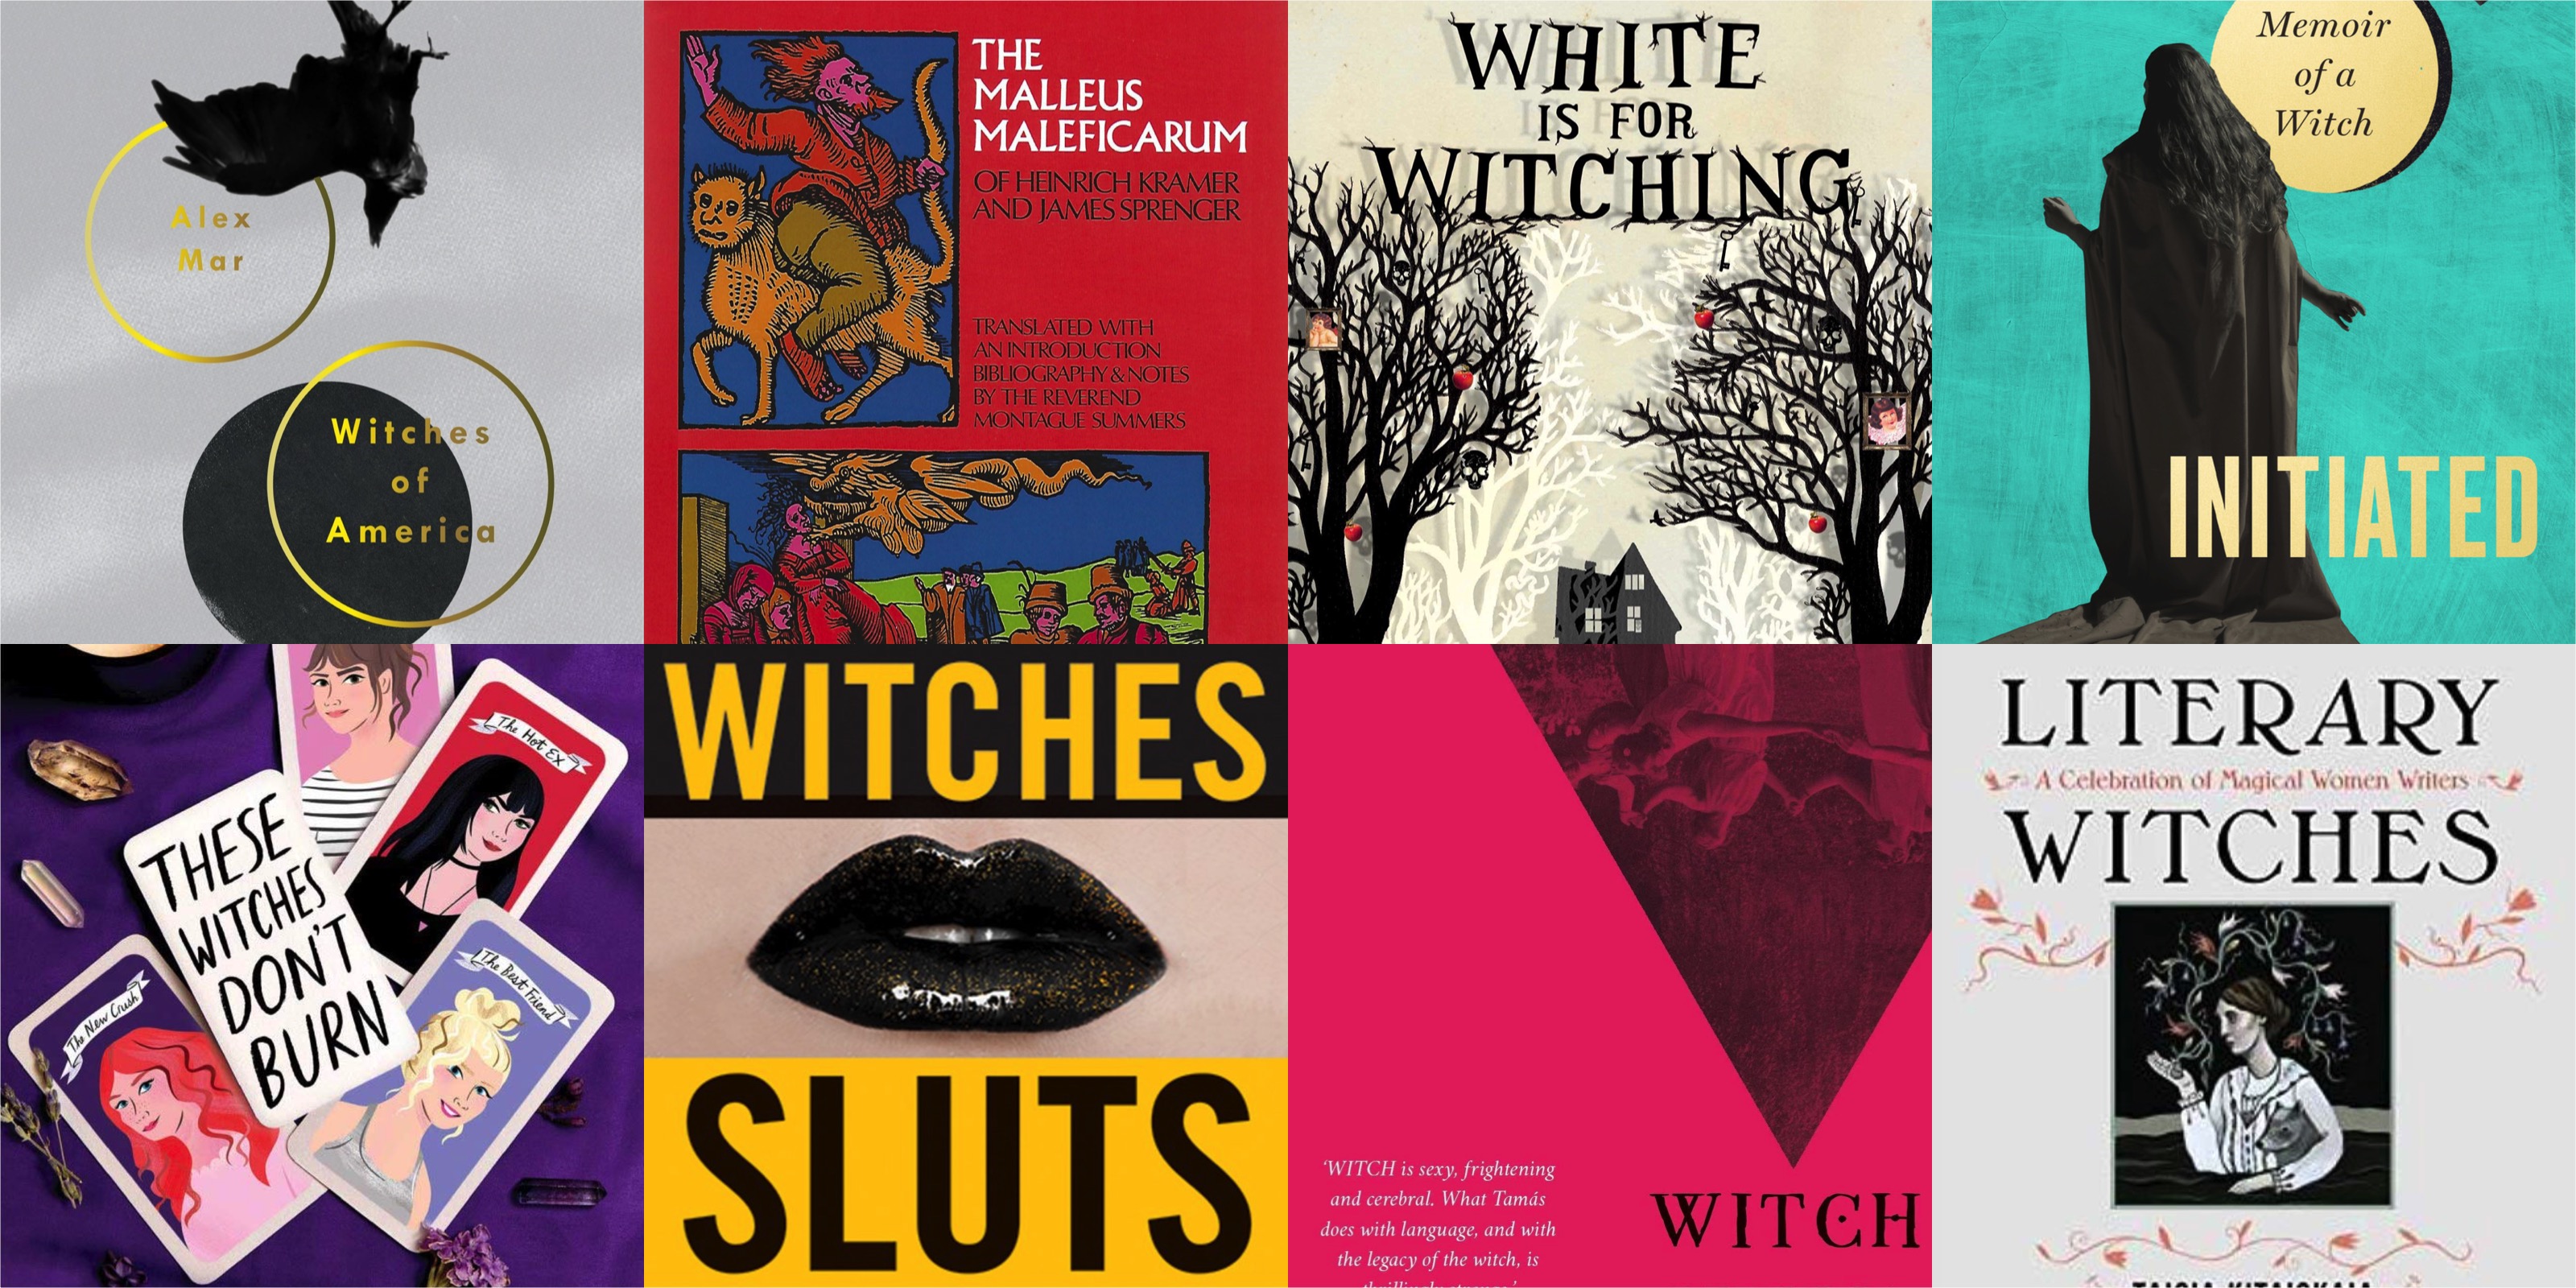 Season of the Witch 40 Books on Witches, Witchcraft and Wonder Autostraddle